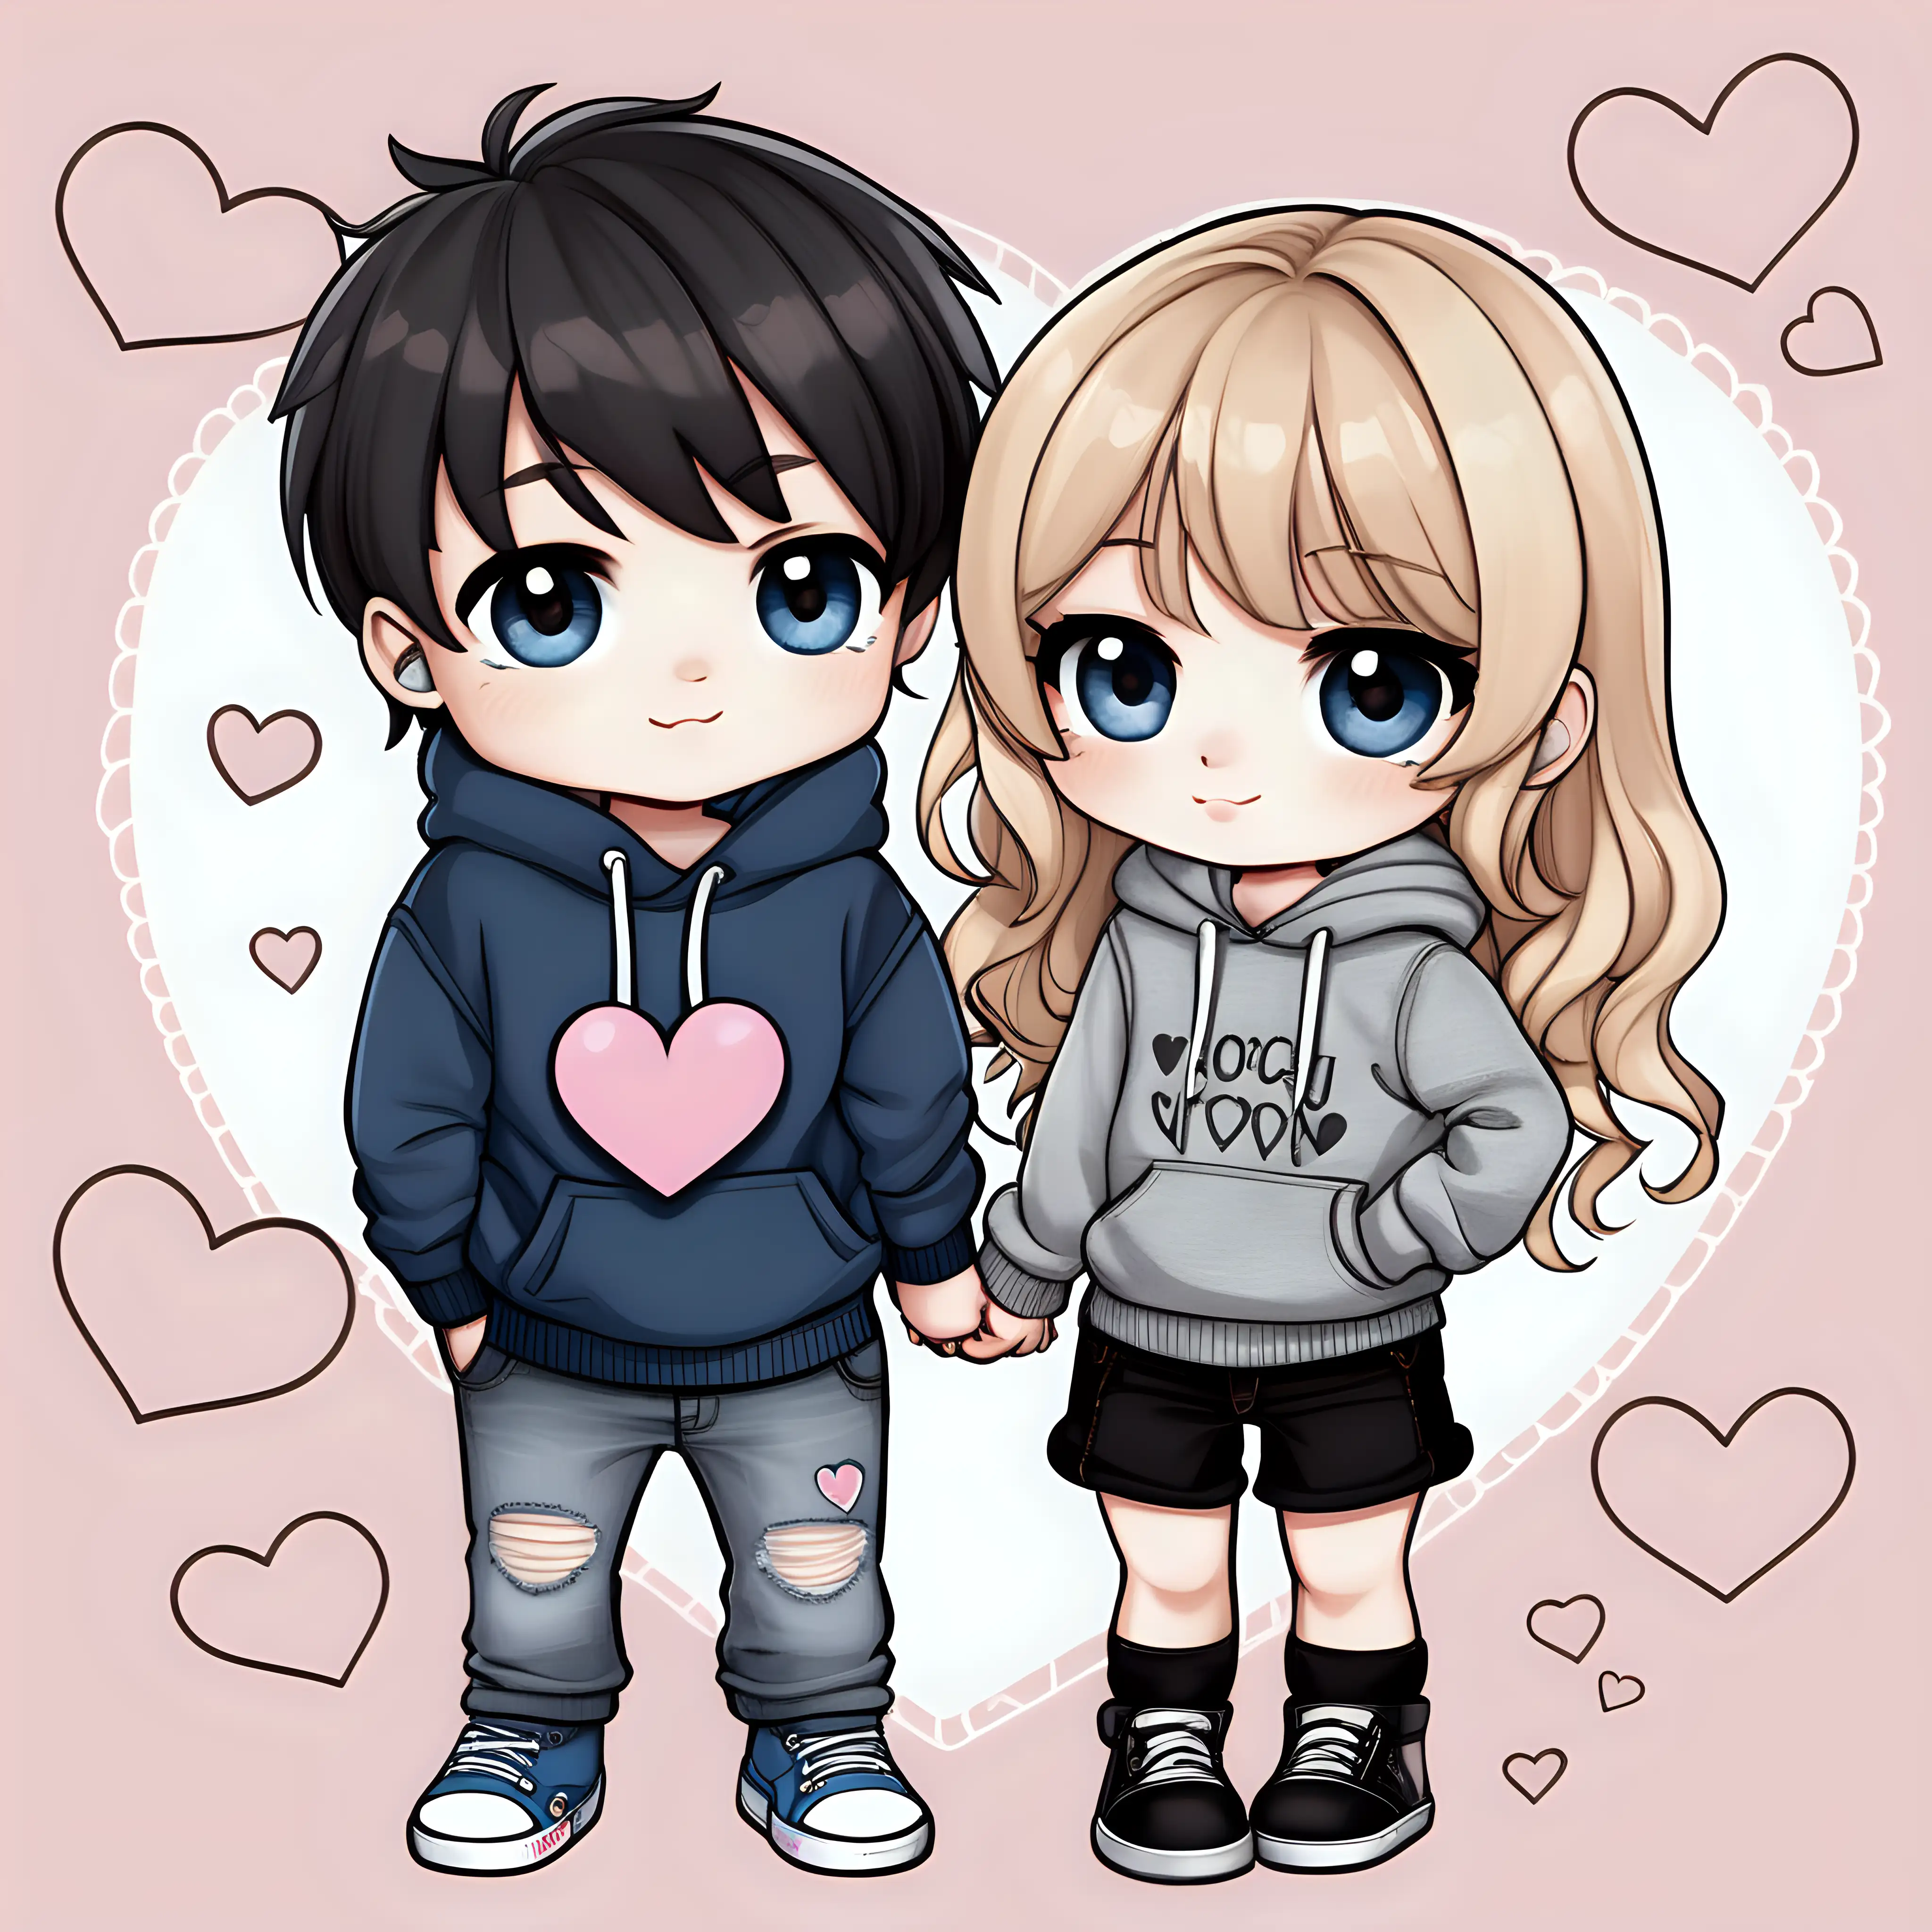 Cute, chibi couple,

Cute 4’11” girl, with  chubby cheeks,  
long wavy blonde hair  bangs,  big 
blue eyes , wearing ripped jeans and gray sweater.  

Boy 5’8”, has very short black hair, he has big brown eyes, wearing black sweatpants,  blue sweatshirt.  

Blueish Valentine’s Day background, few details, dreamy, hearts and clouds